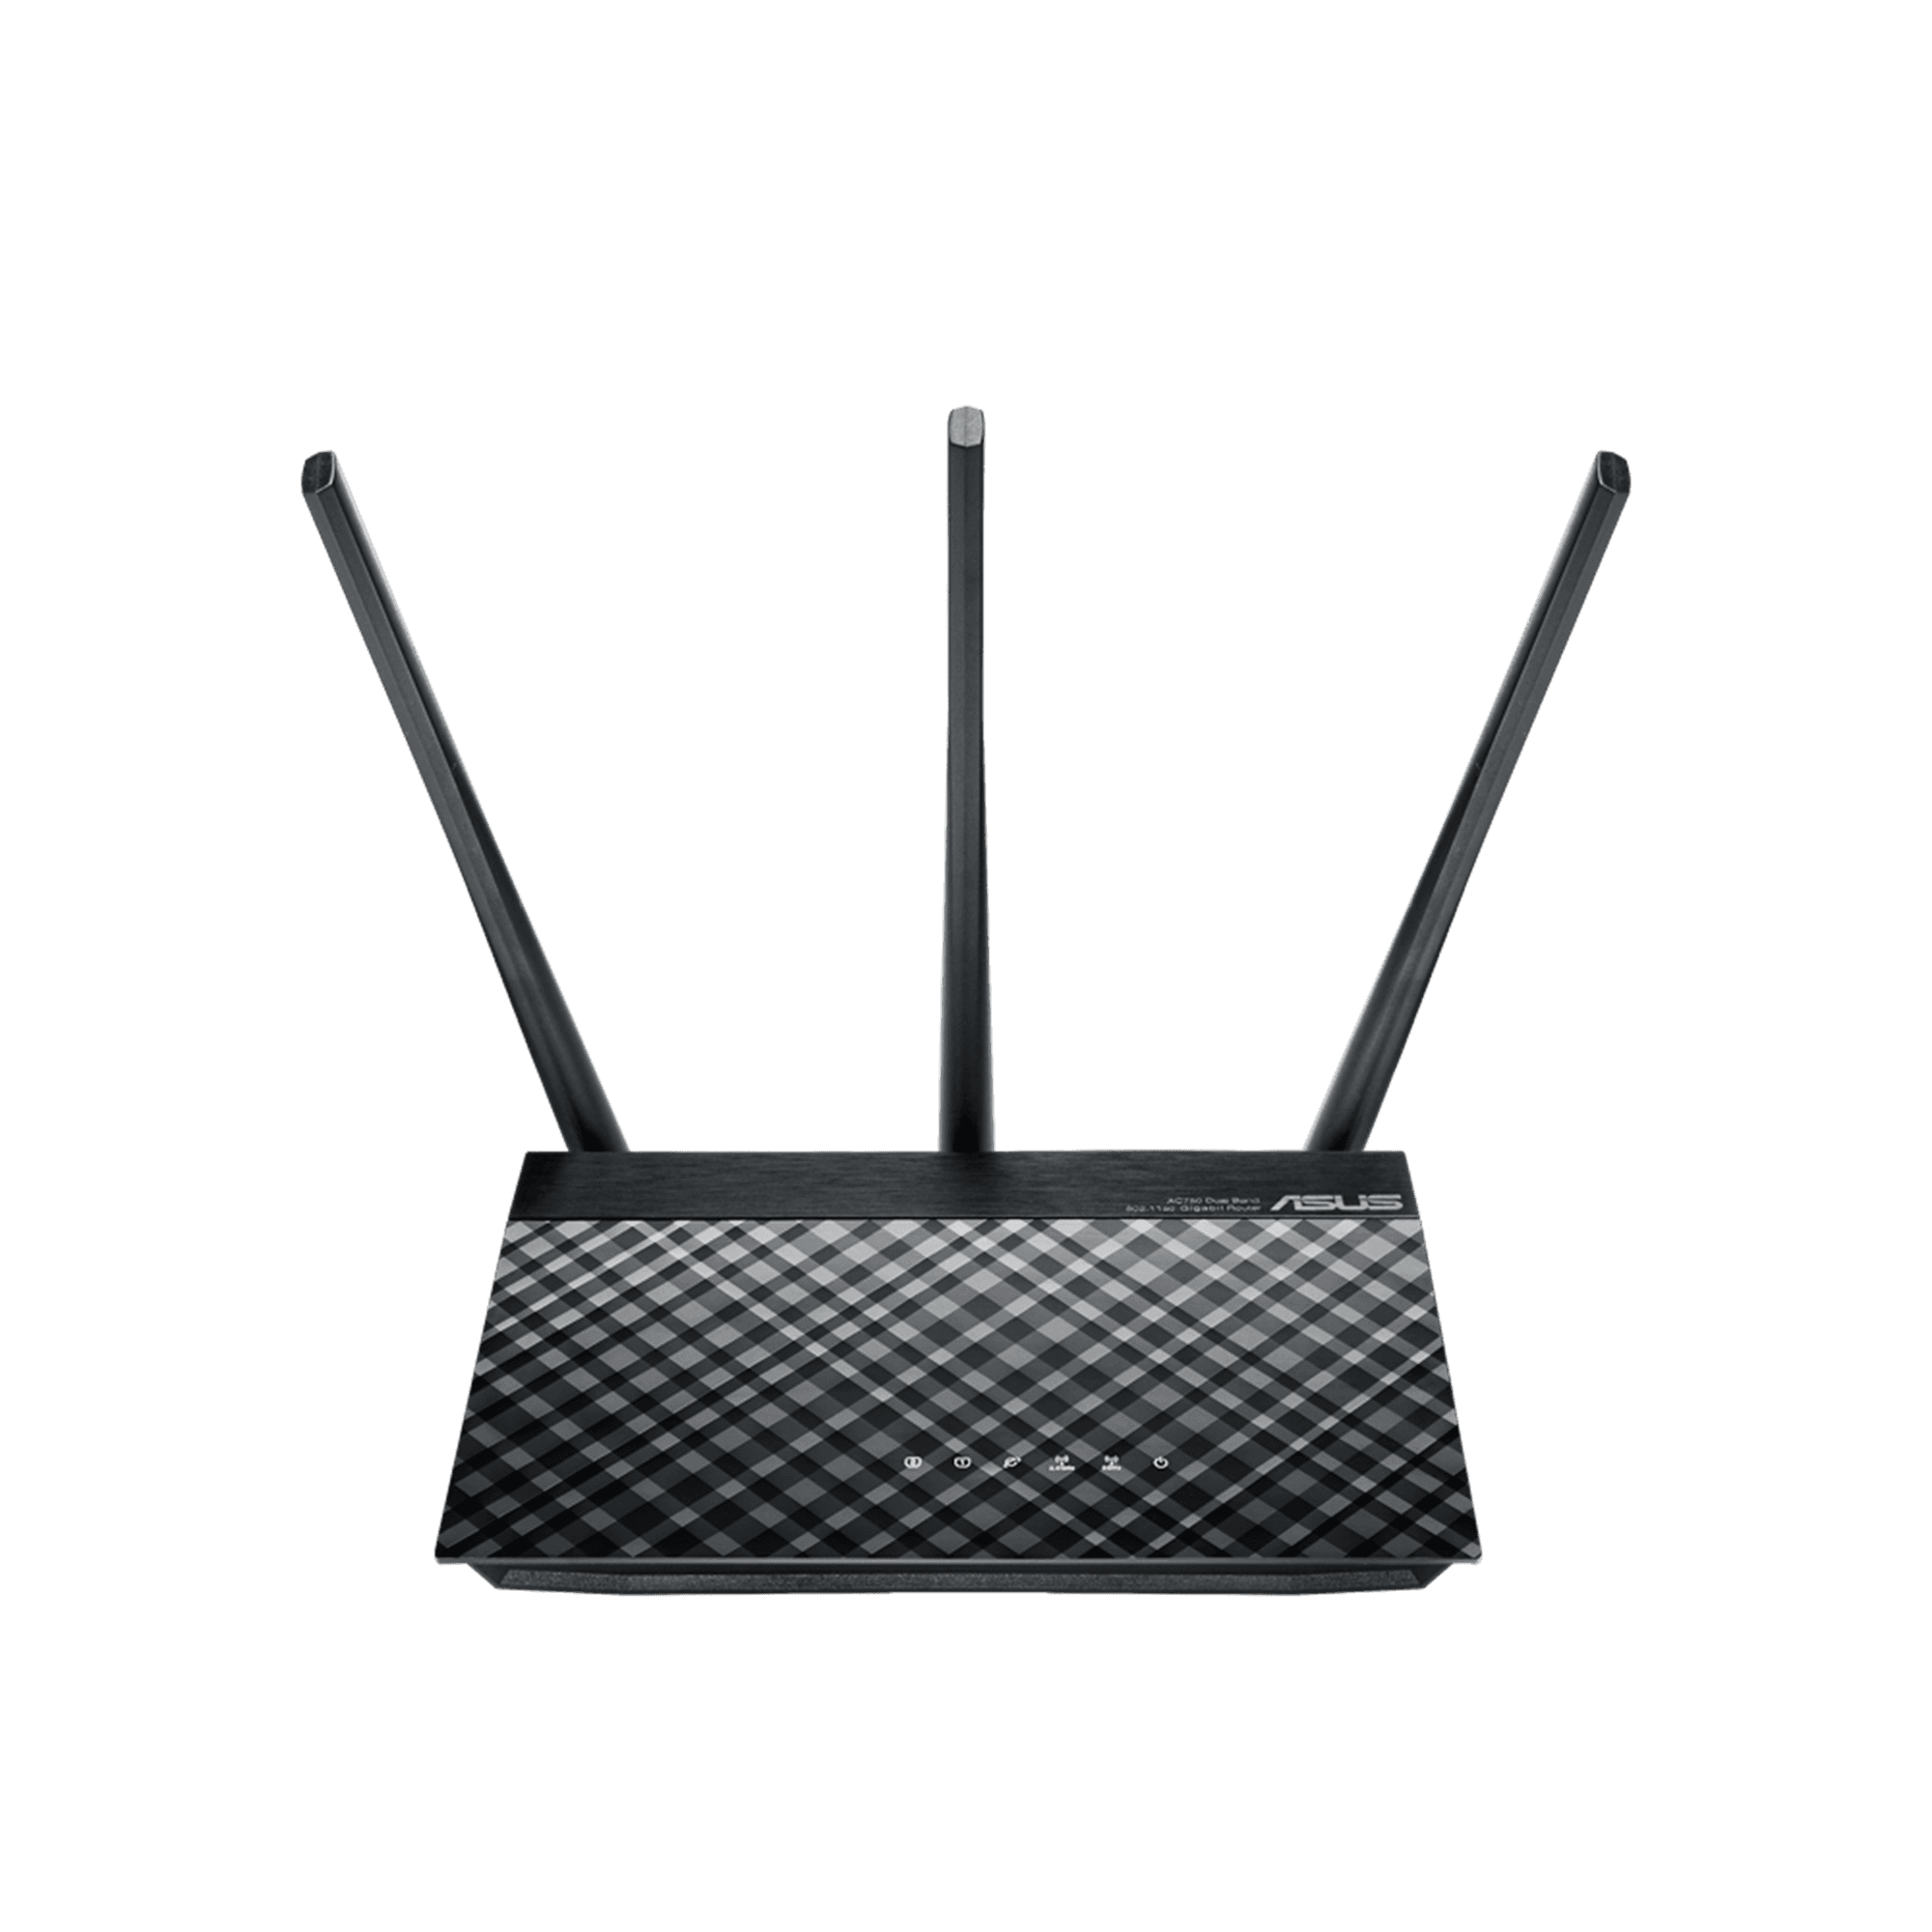 ASUS RT-AC53 WIRELESS AC750 GIGABIT DUAL-BAND ROUTER